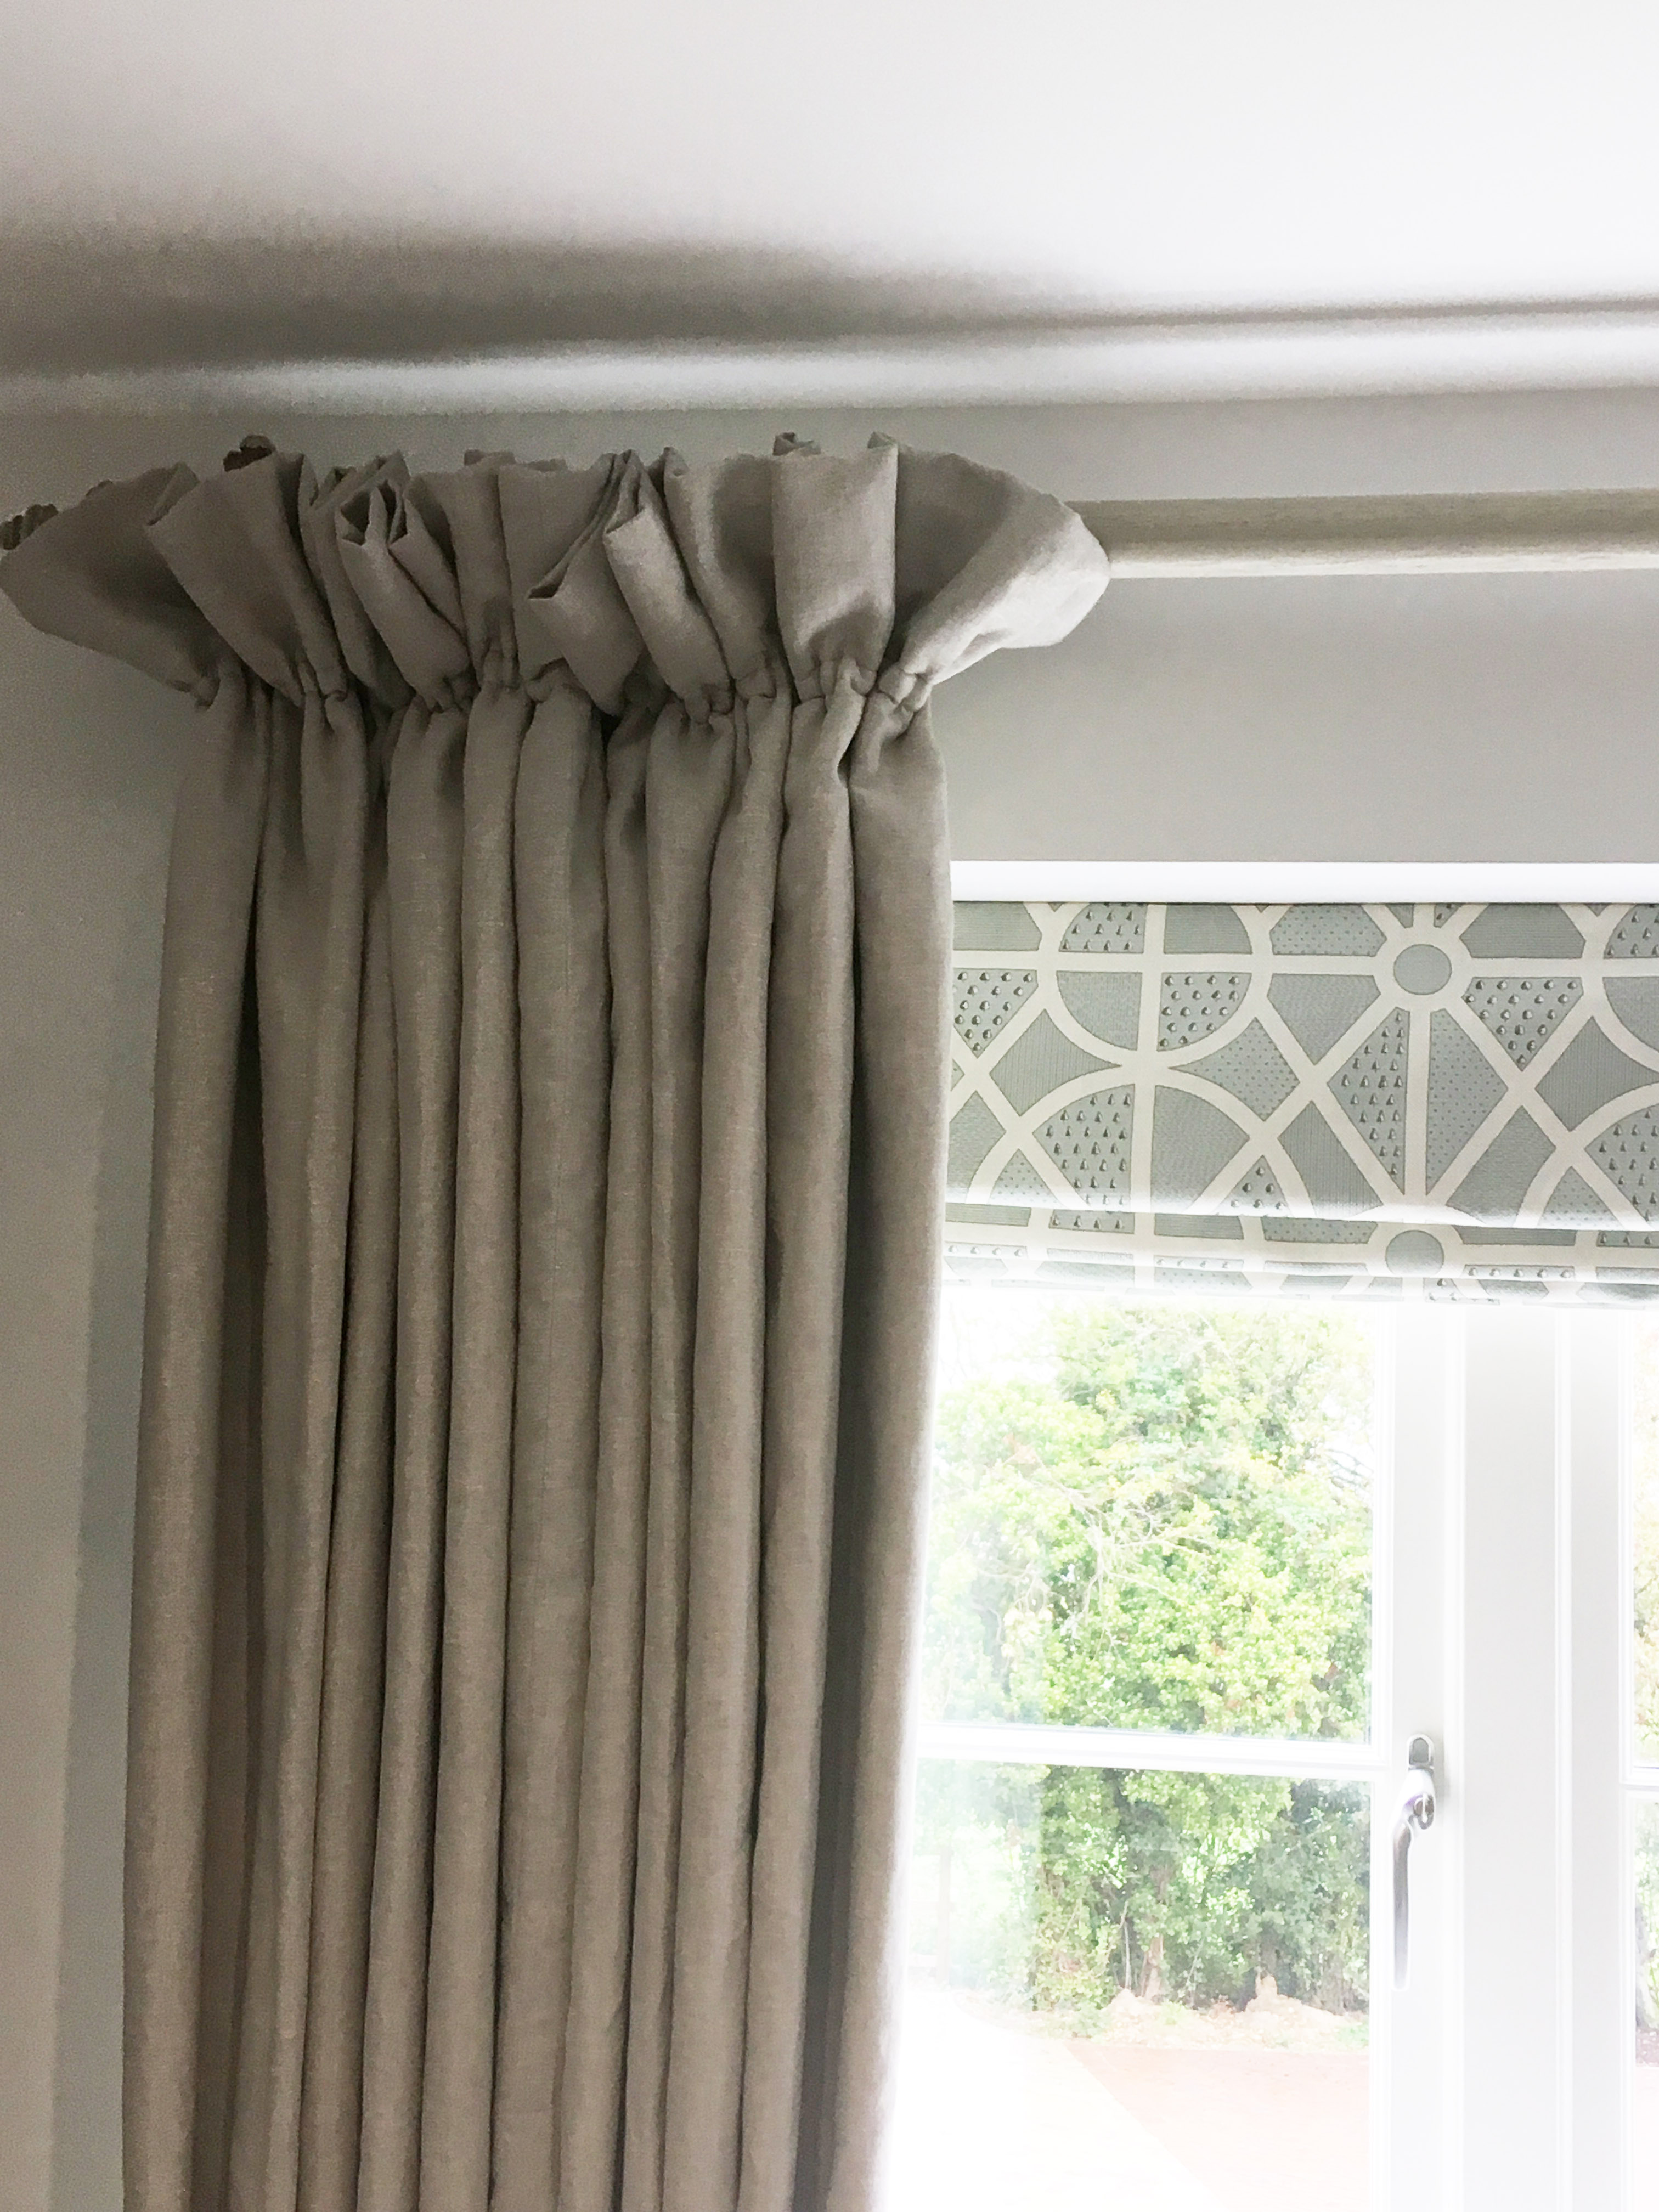 Cottage frill heading linen curtains with Sanderson Garden Plan fabric on roman blind